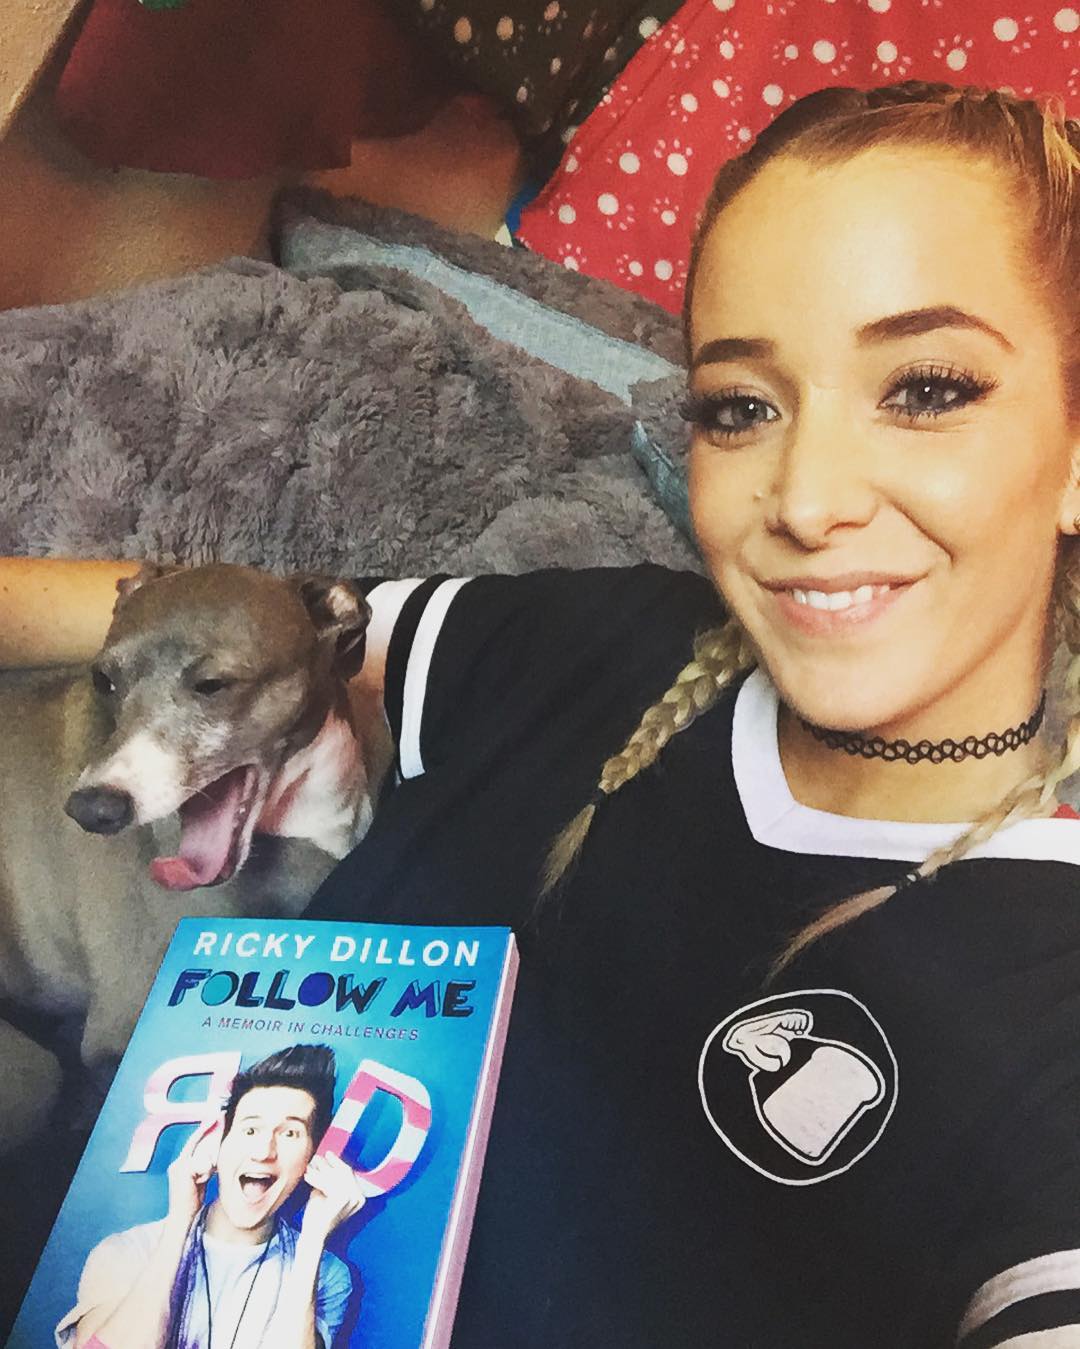 70+ Hot Pictures Of Jenna Marbles Prove She Is The Hottest Youtuber 57